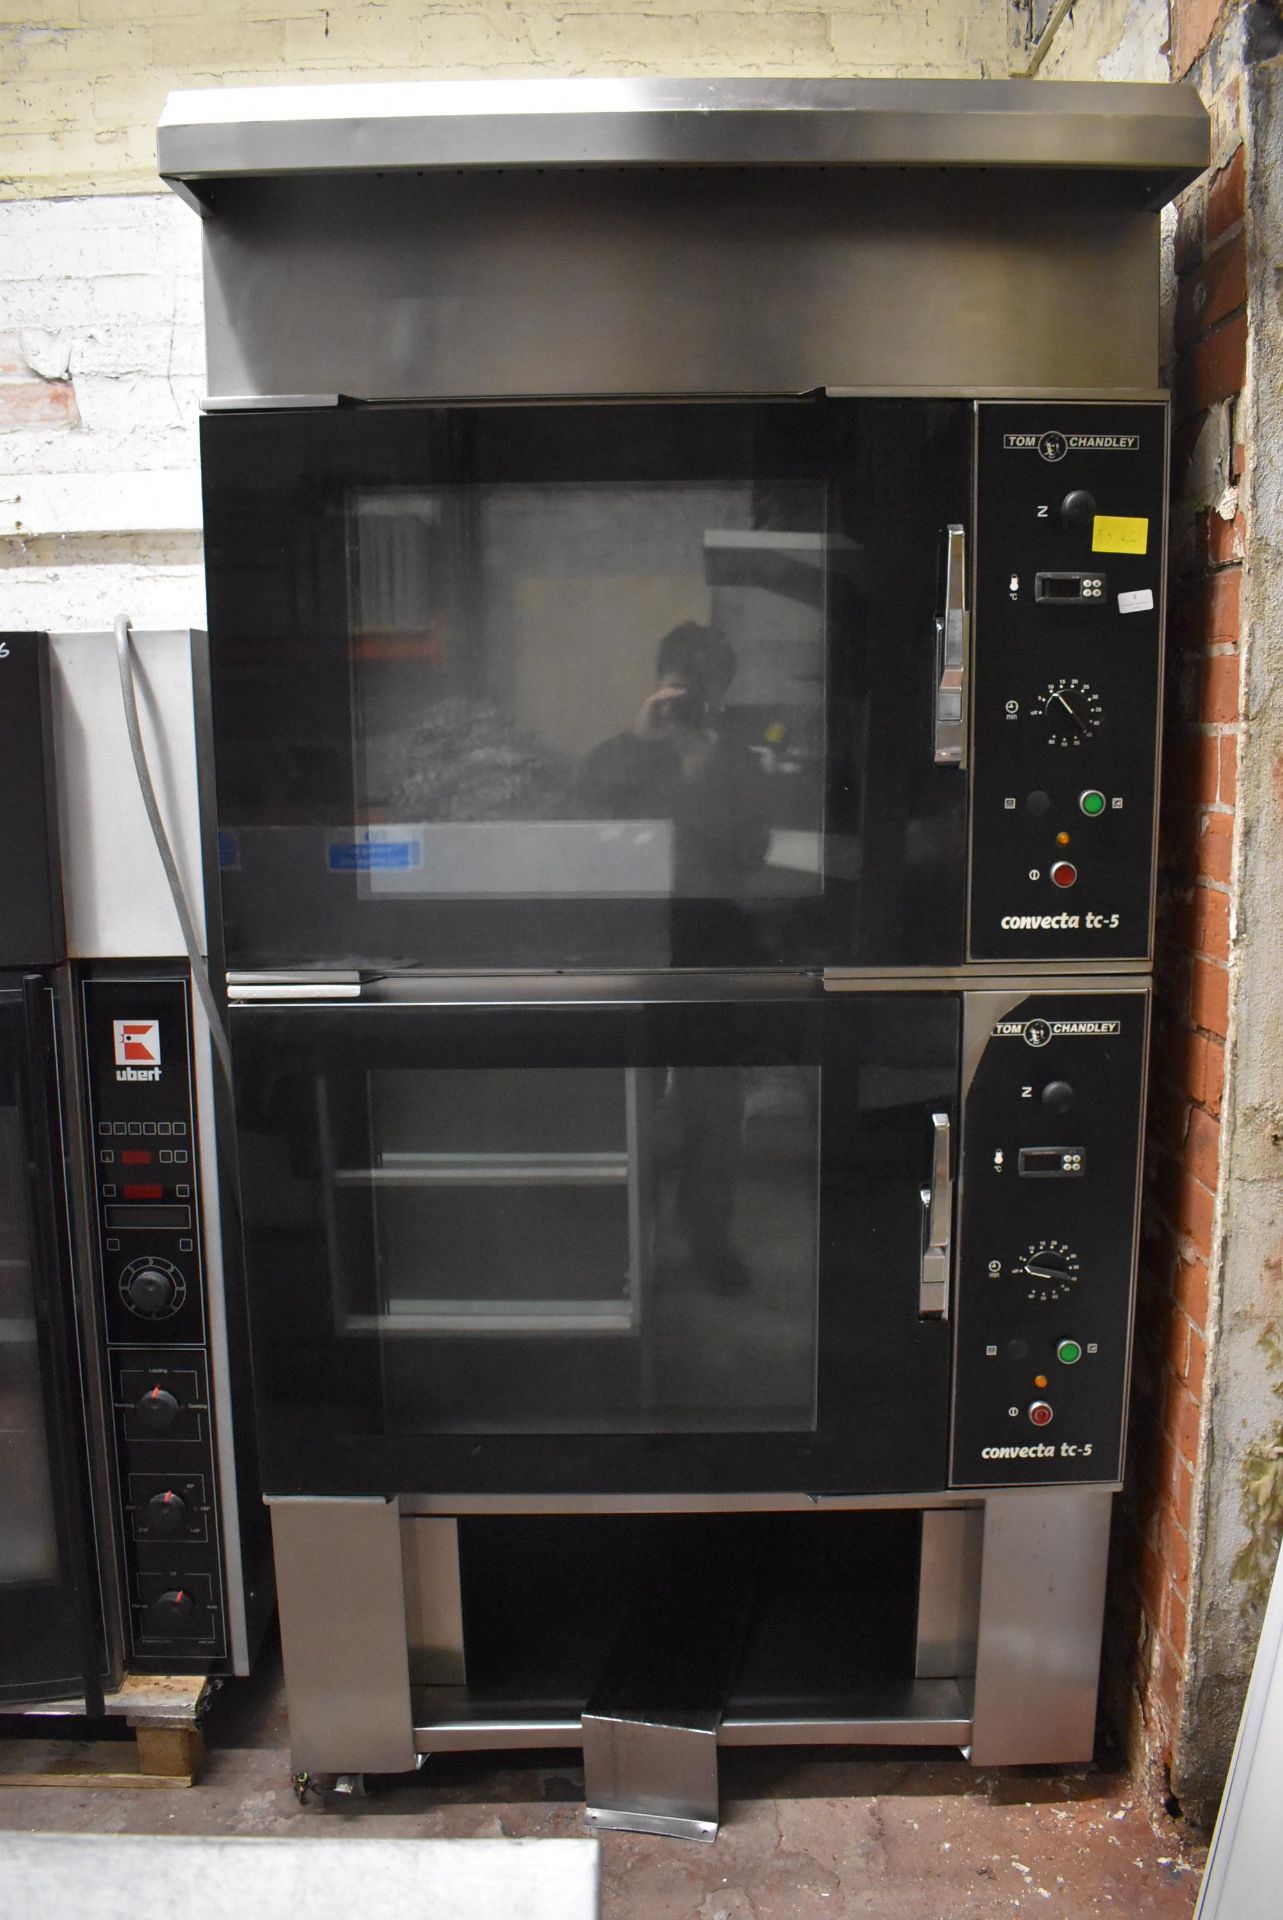 *Tom Chandley Double Convecta TC-5 Oven